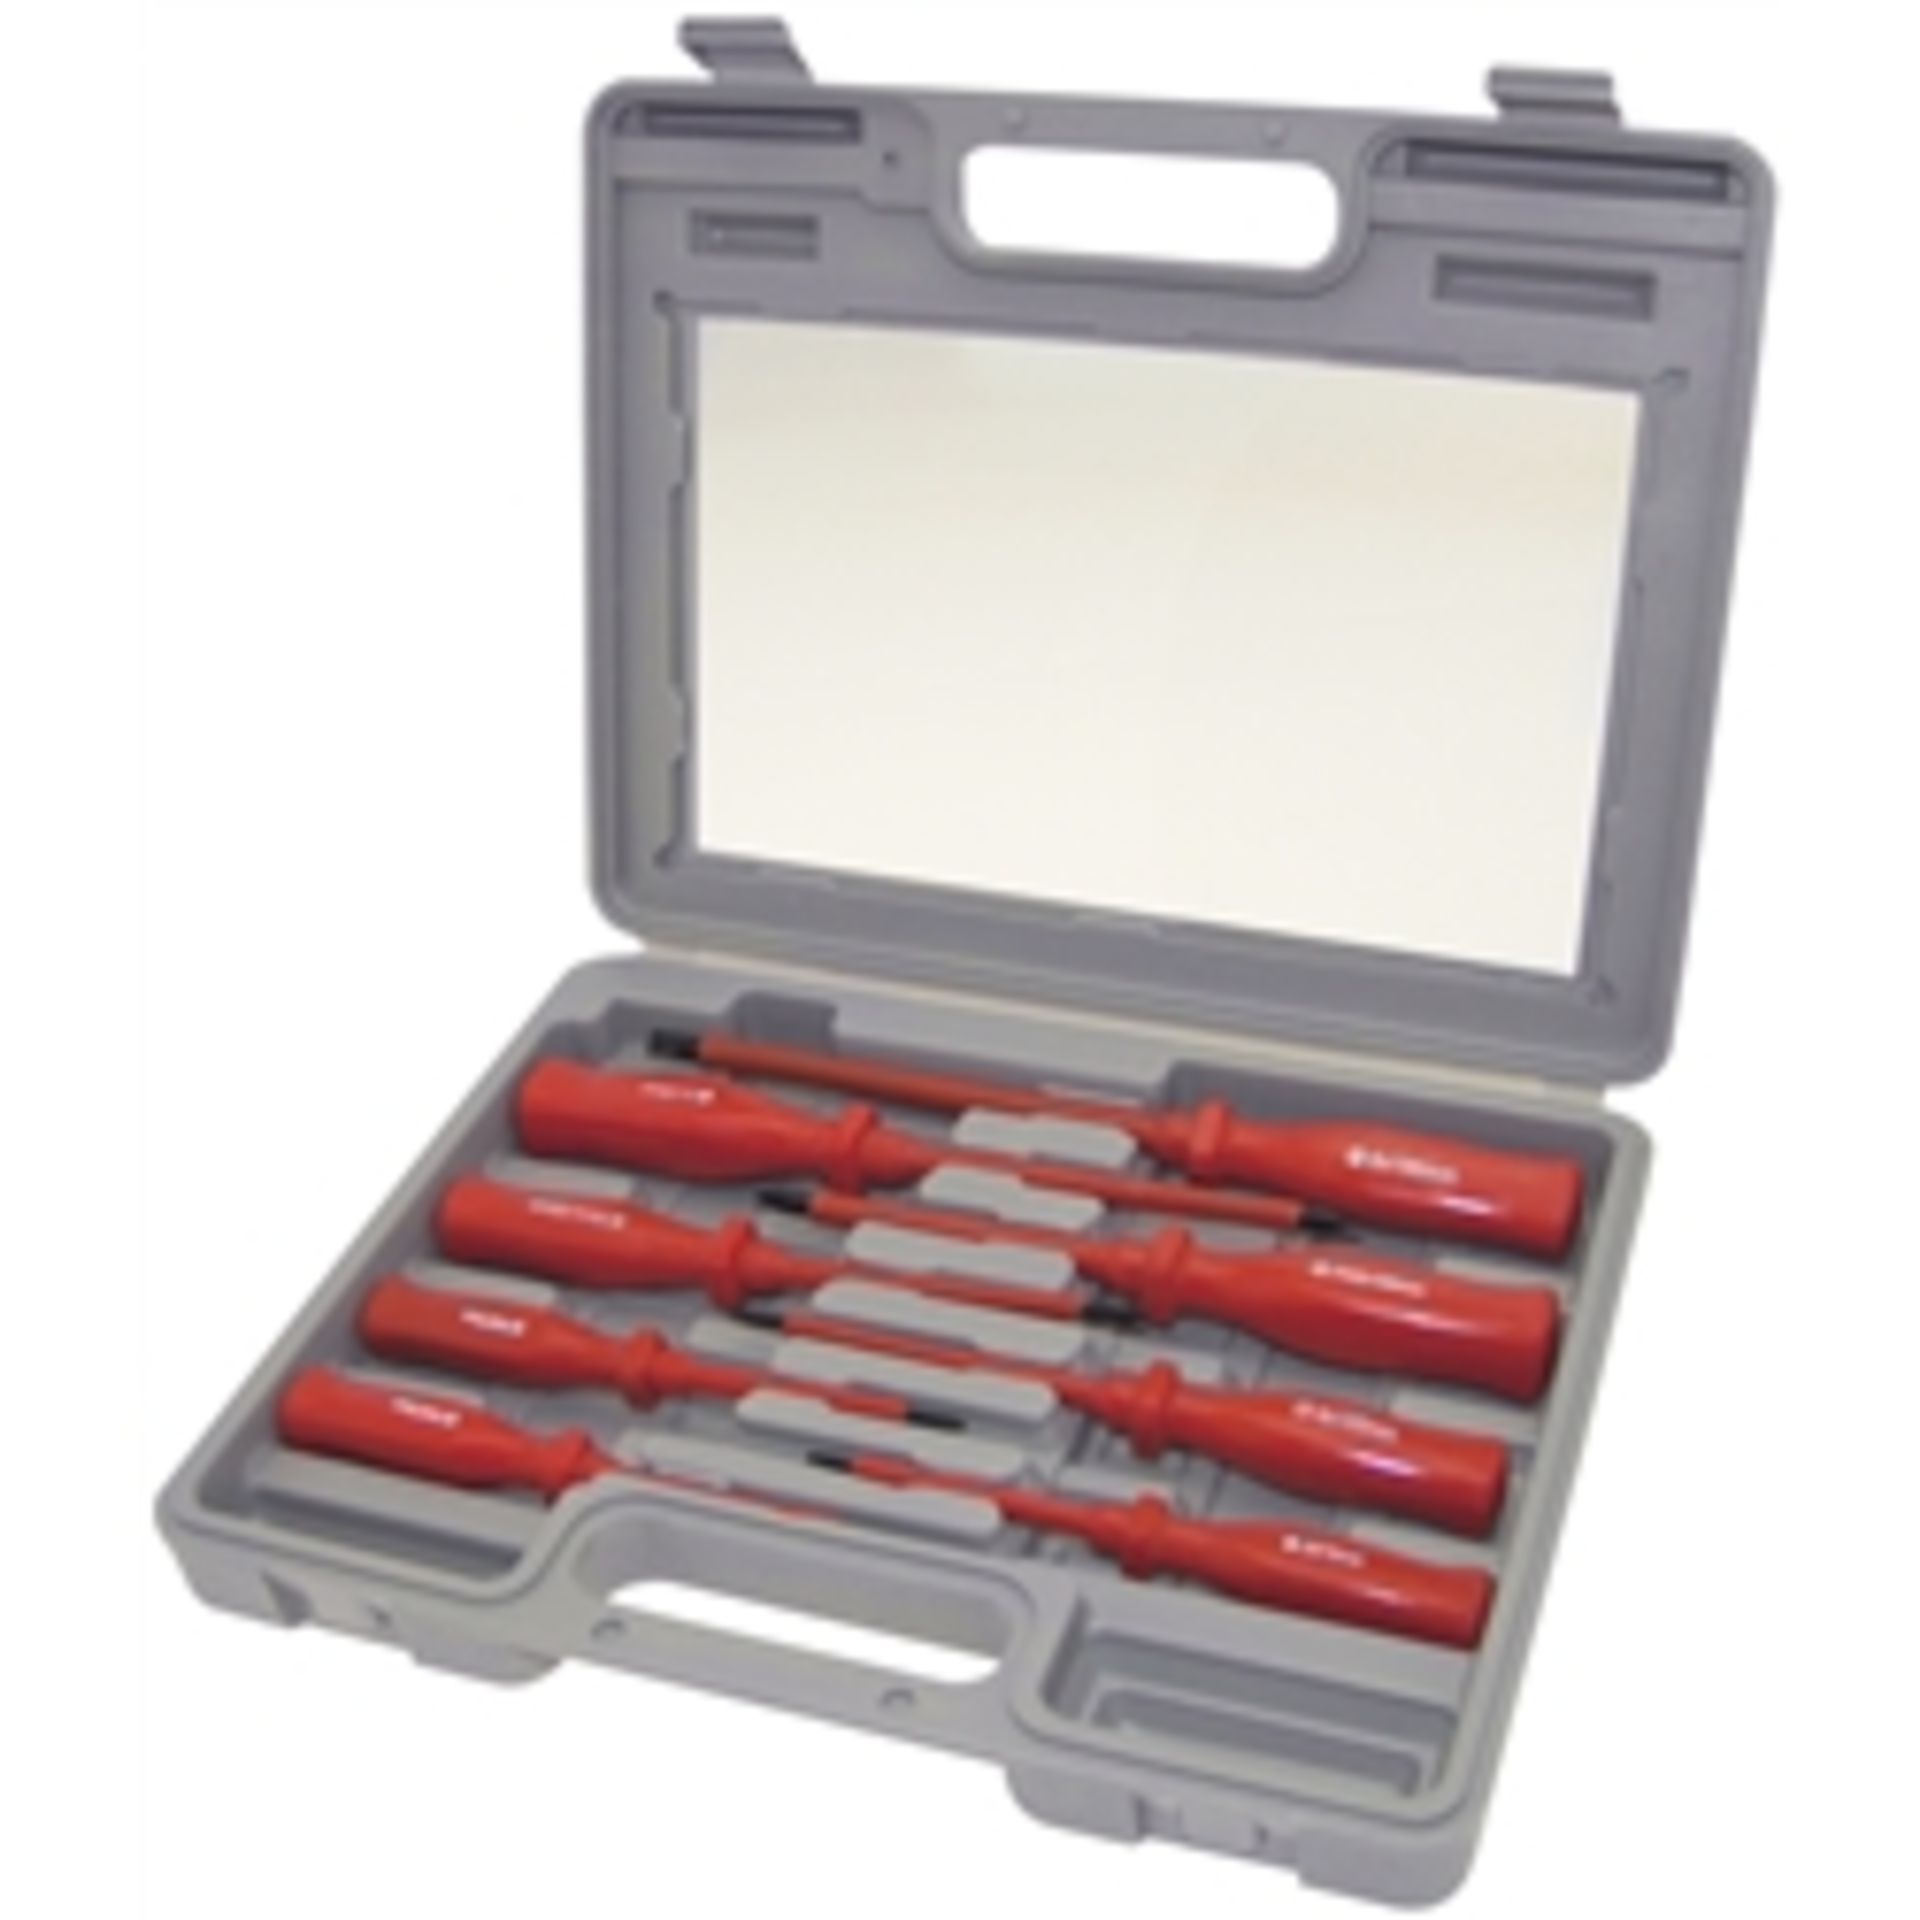 V Brand New Eight Piece Screwdriver Set In Carry case X 2 YOUR BID PRICE TO BE MULTIPLIED BY TWO - Image 2 of 2